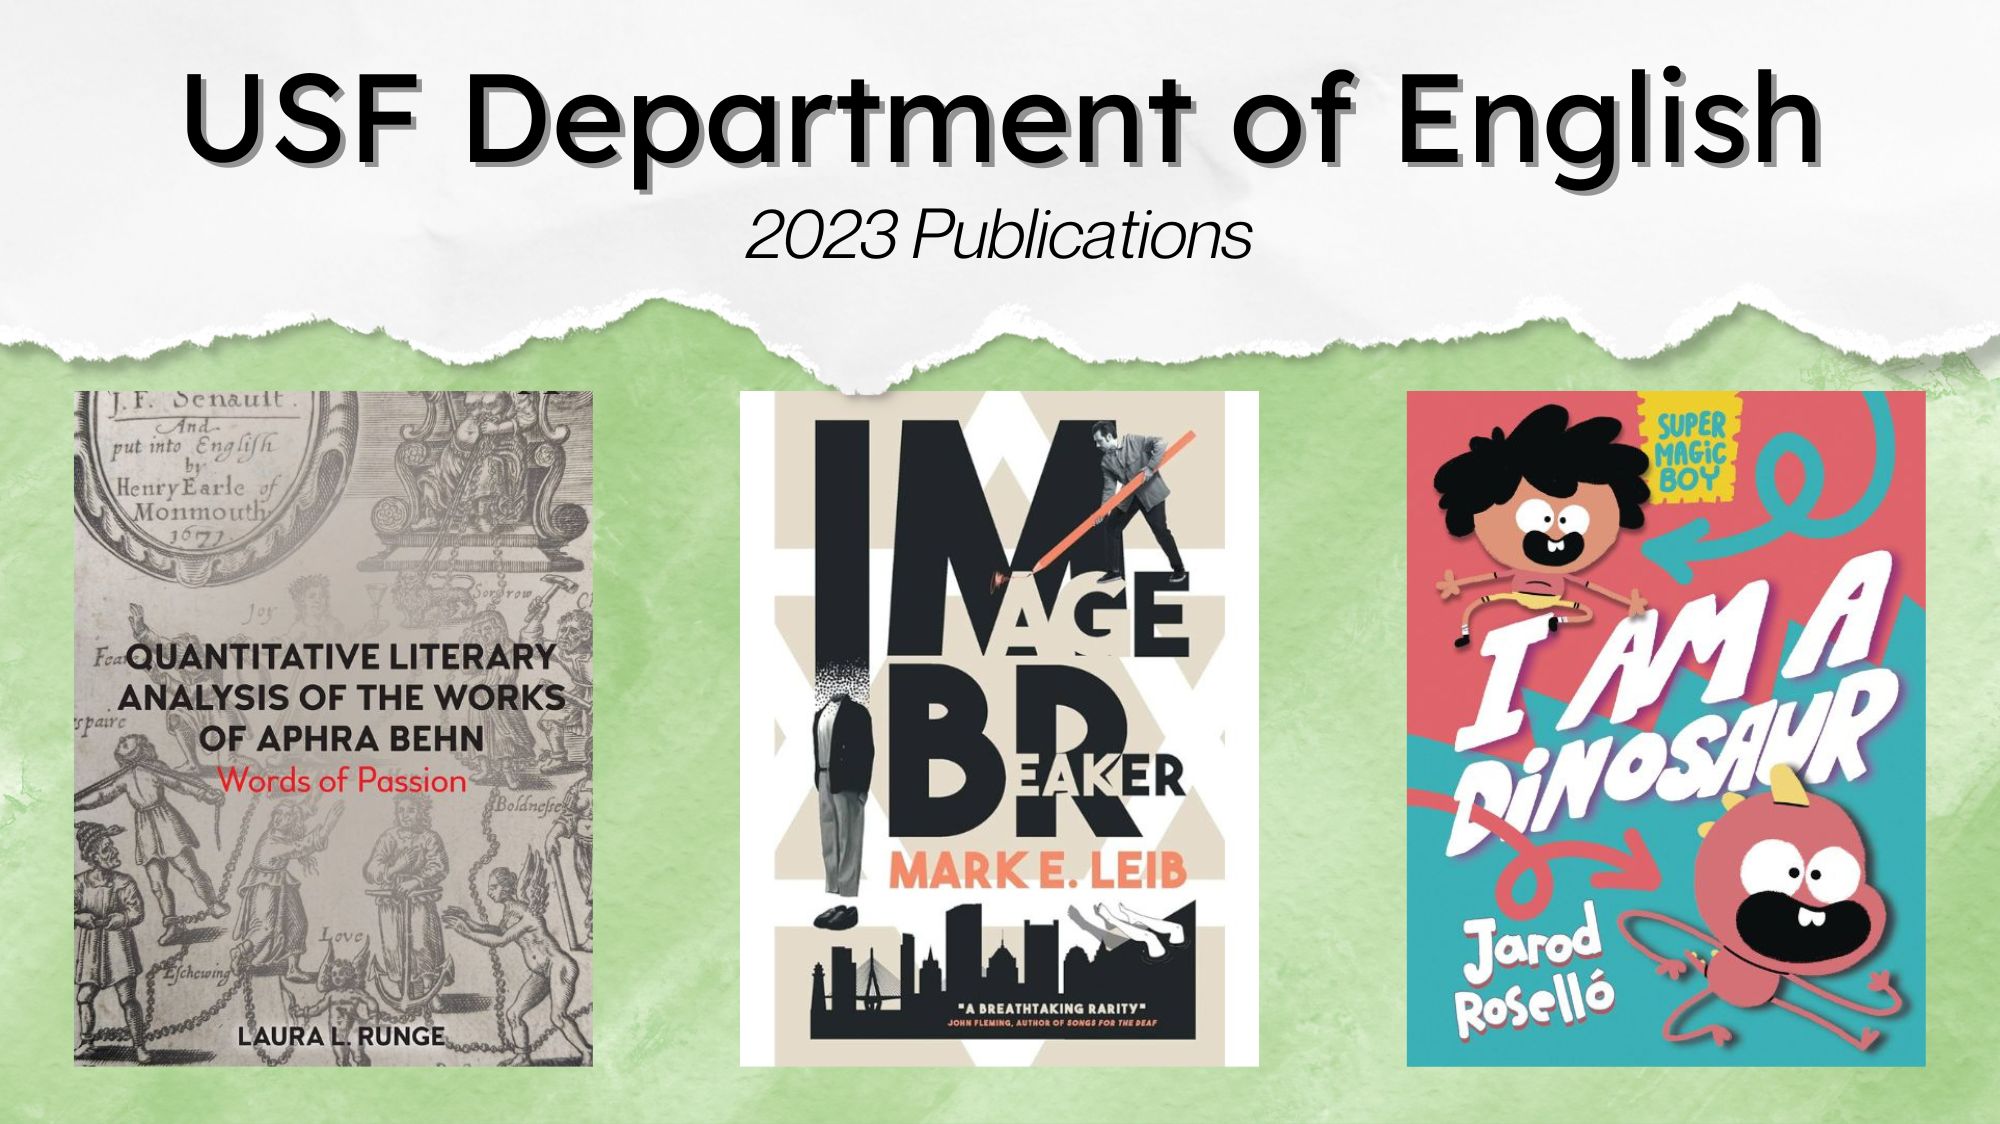 USF Department of English 2023 Publications